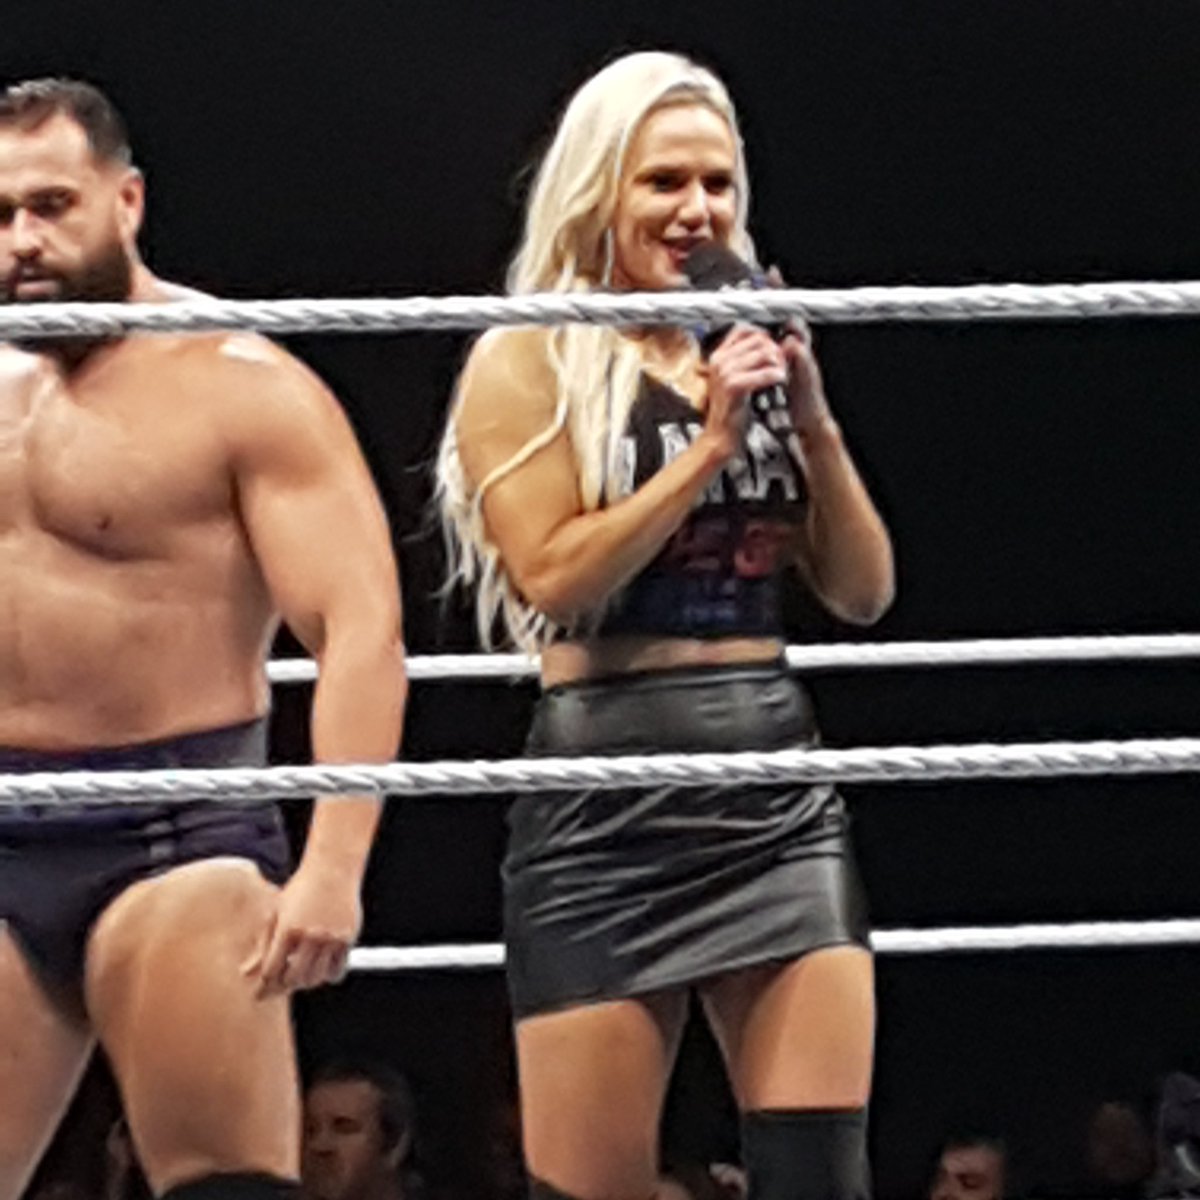 RT @kristenleigh25: @LanaWWE Congrats to Rey and @RusevBUL! You looked so pretty! https://t.co/C7Q3Der3L6